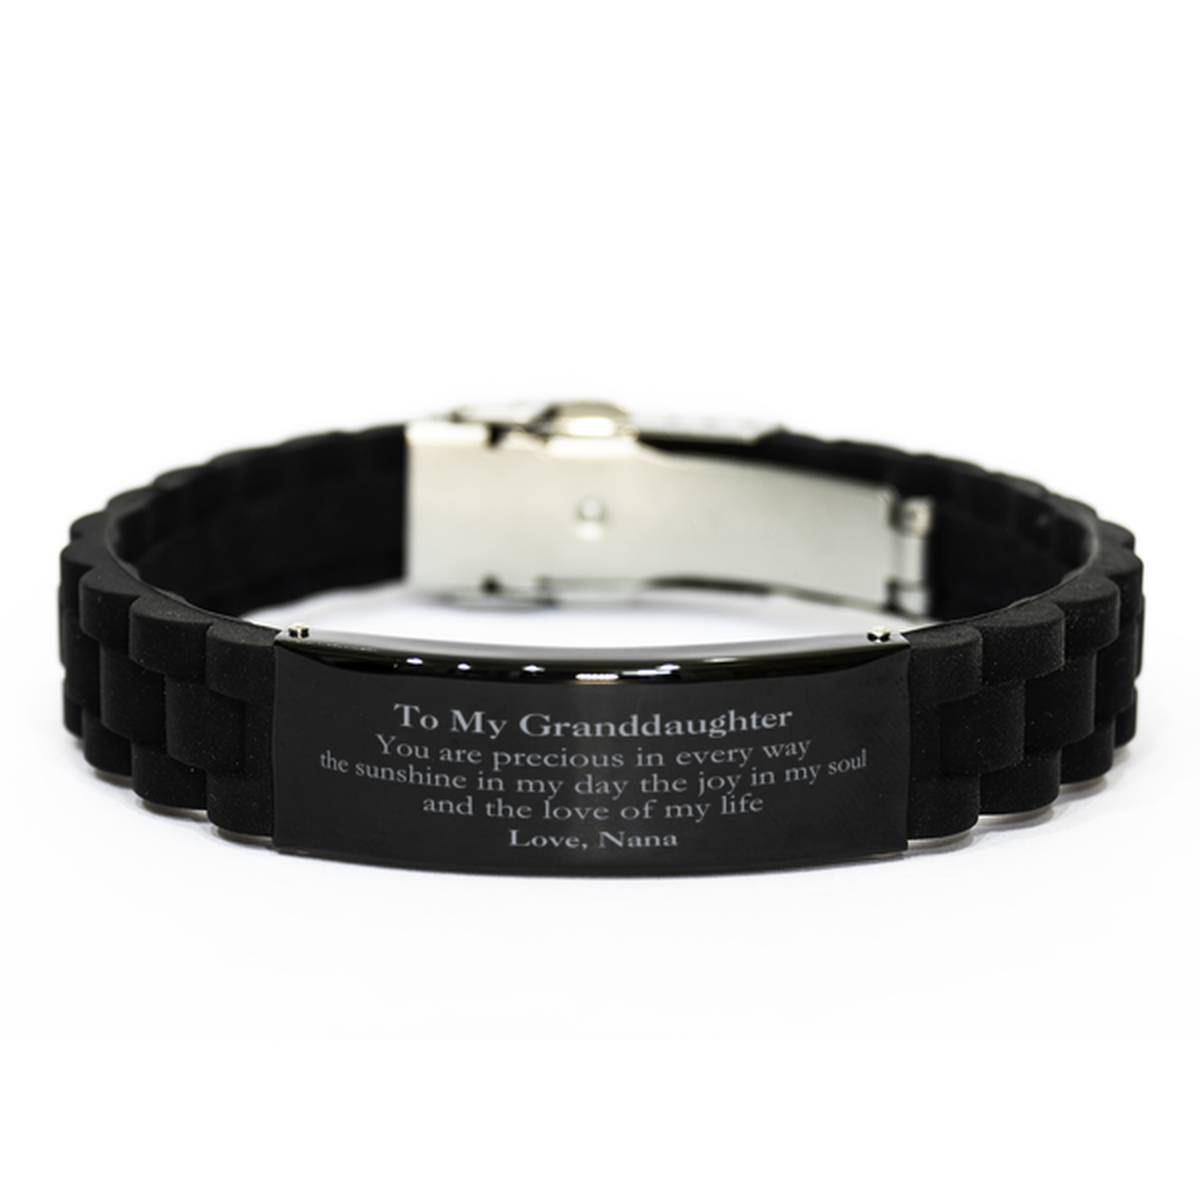 Graduation Gifts for Granddaughter Black Glidelock Clasp Bracelet Present from Nana, Christmas Granddaughter Birthday Gifts Granddaughter You are precious in every way the sunshine in my day. Love, Nana